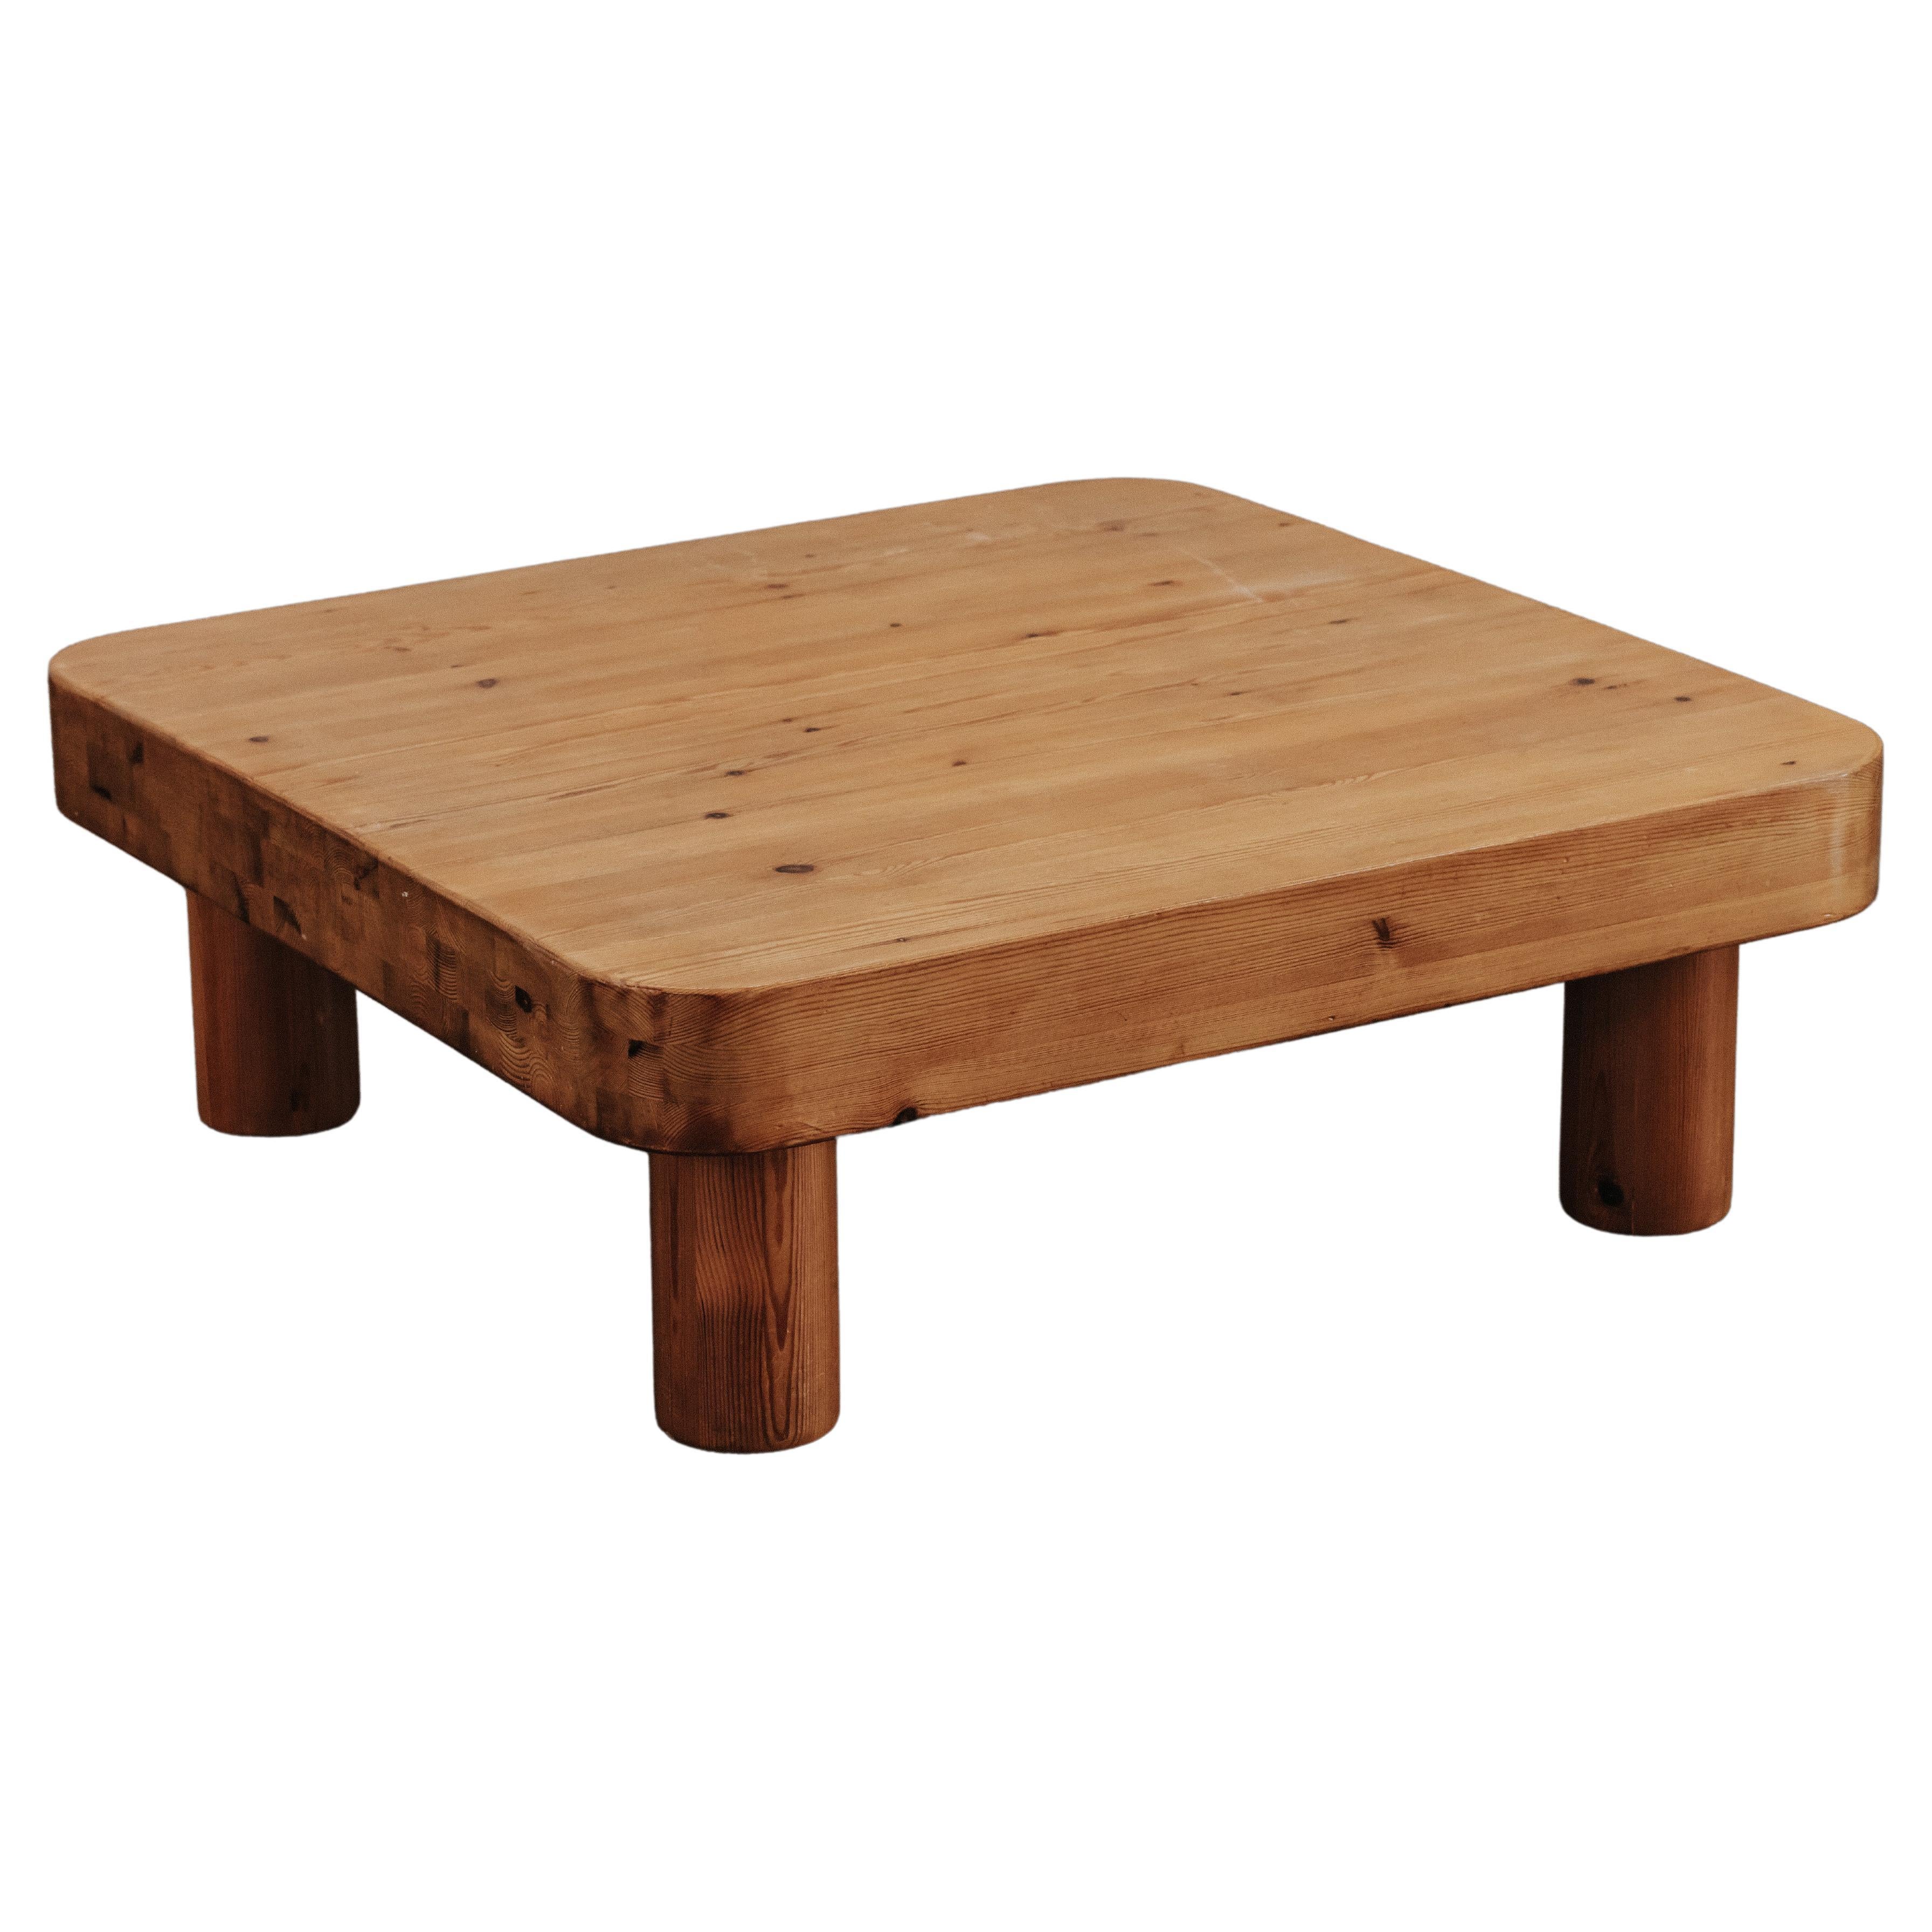 Vintage Square Pine Coffee Table From France, Circa 1960